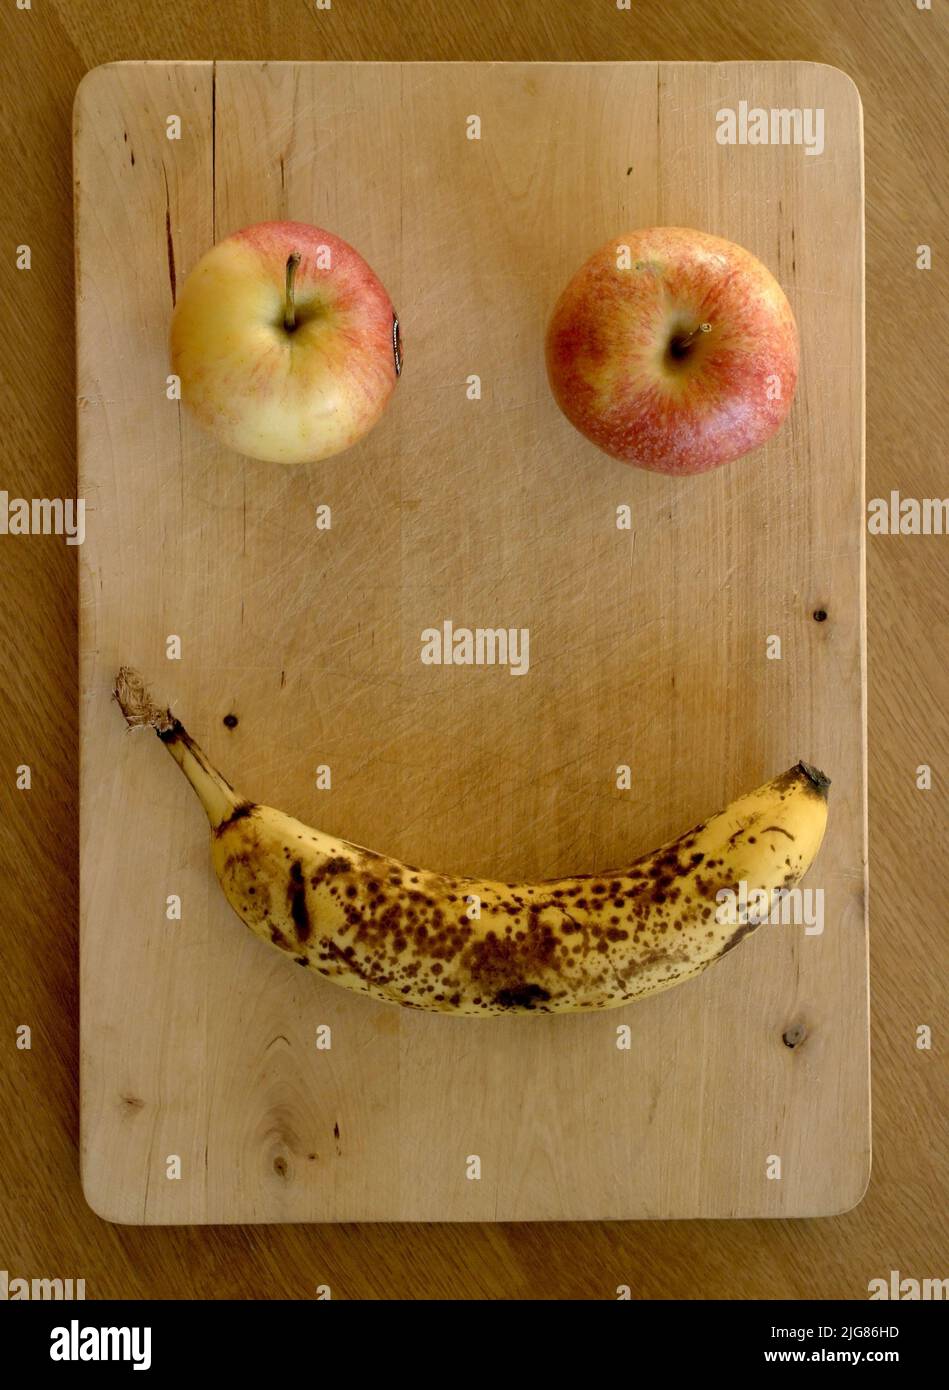 Two apples and a banana forming a face. Stock Photo